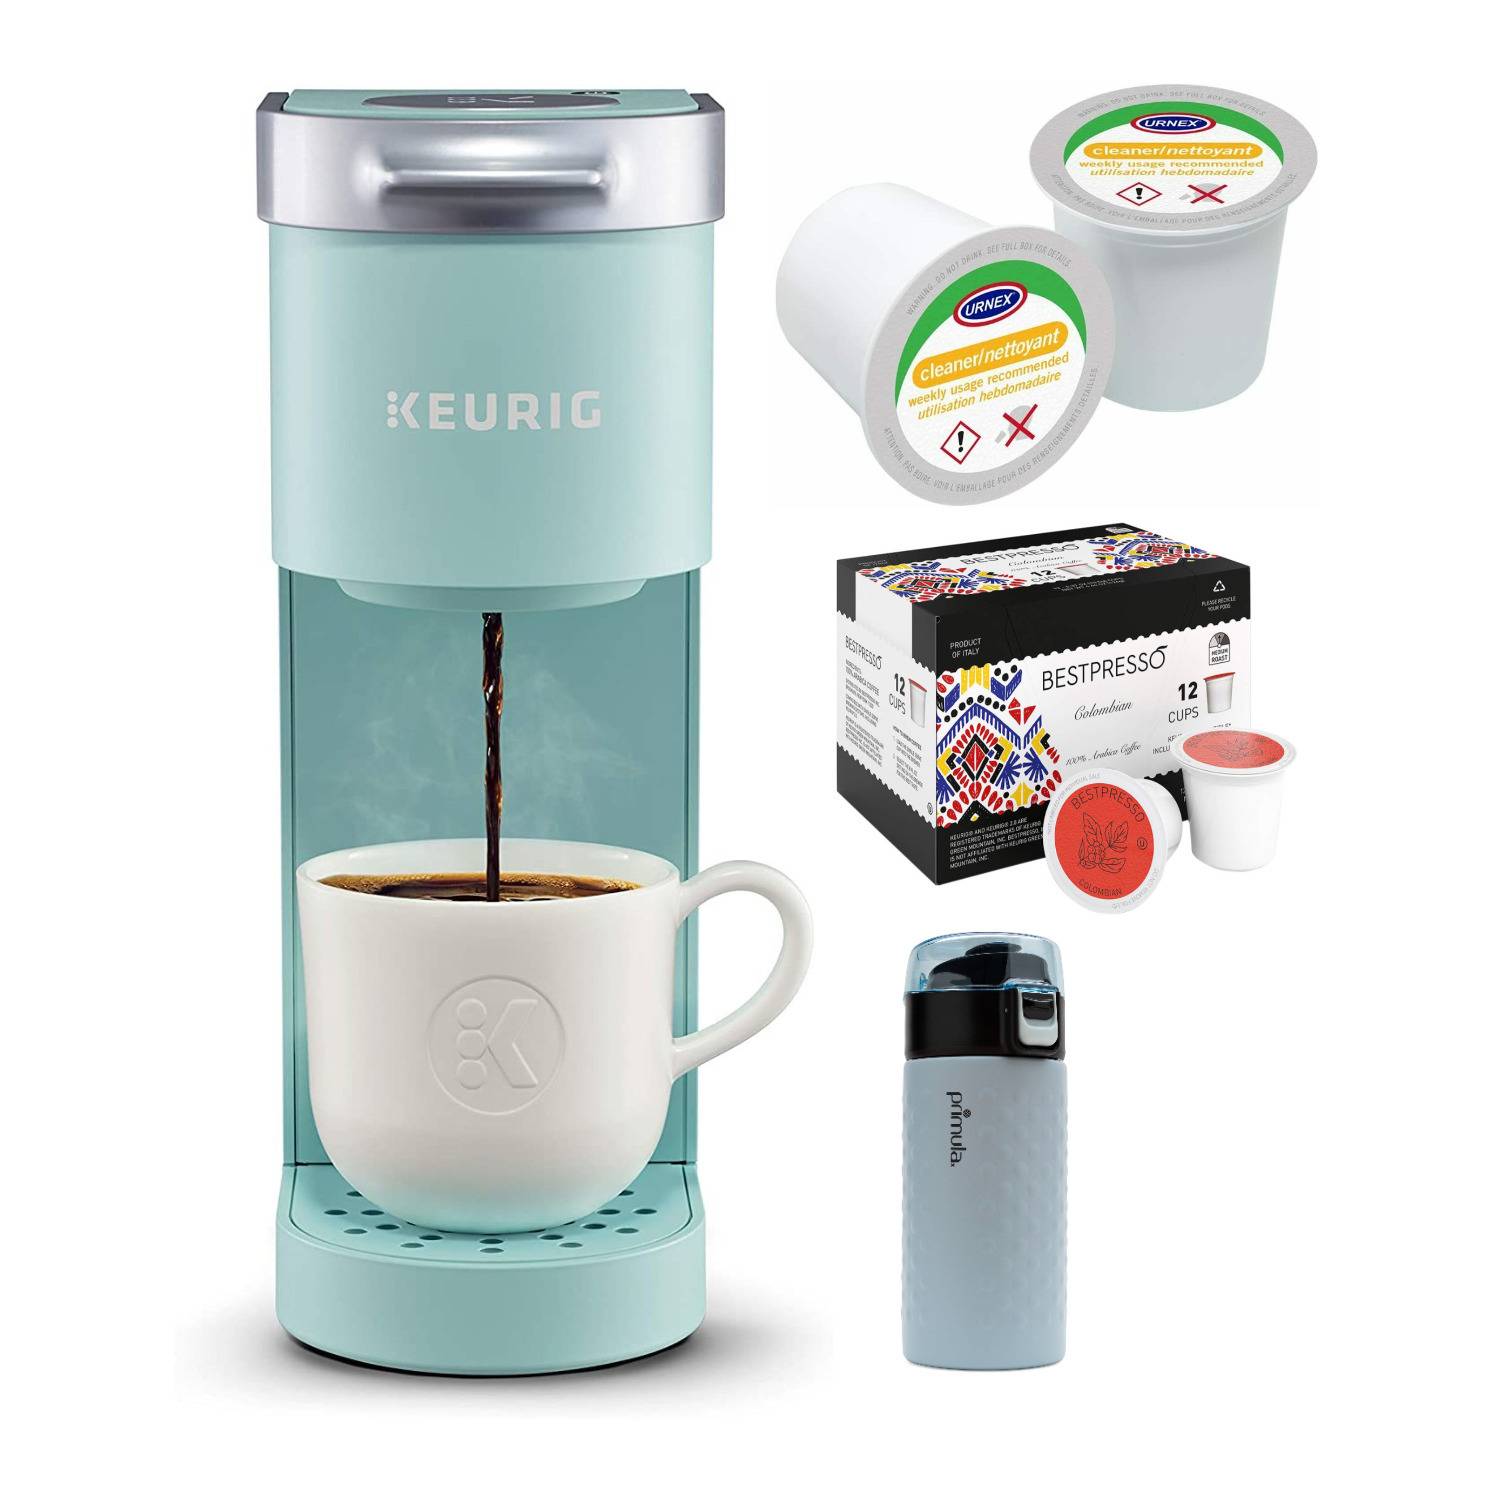 Keurig K-Mini Single Serve Coffee Maker with Colombian Roast Coffee, Cleaning Cups and Tumbler